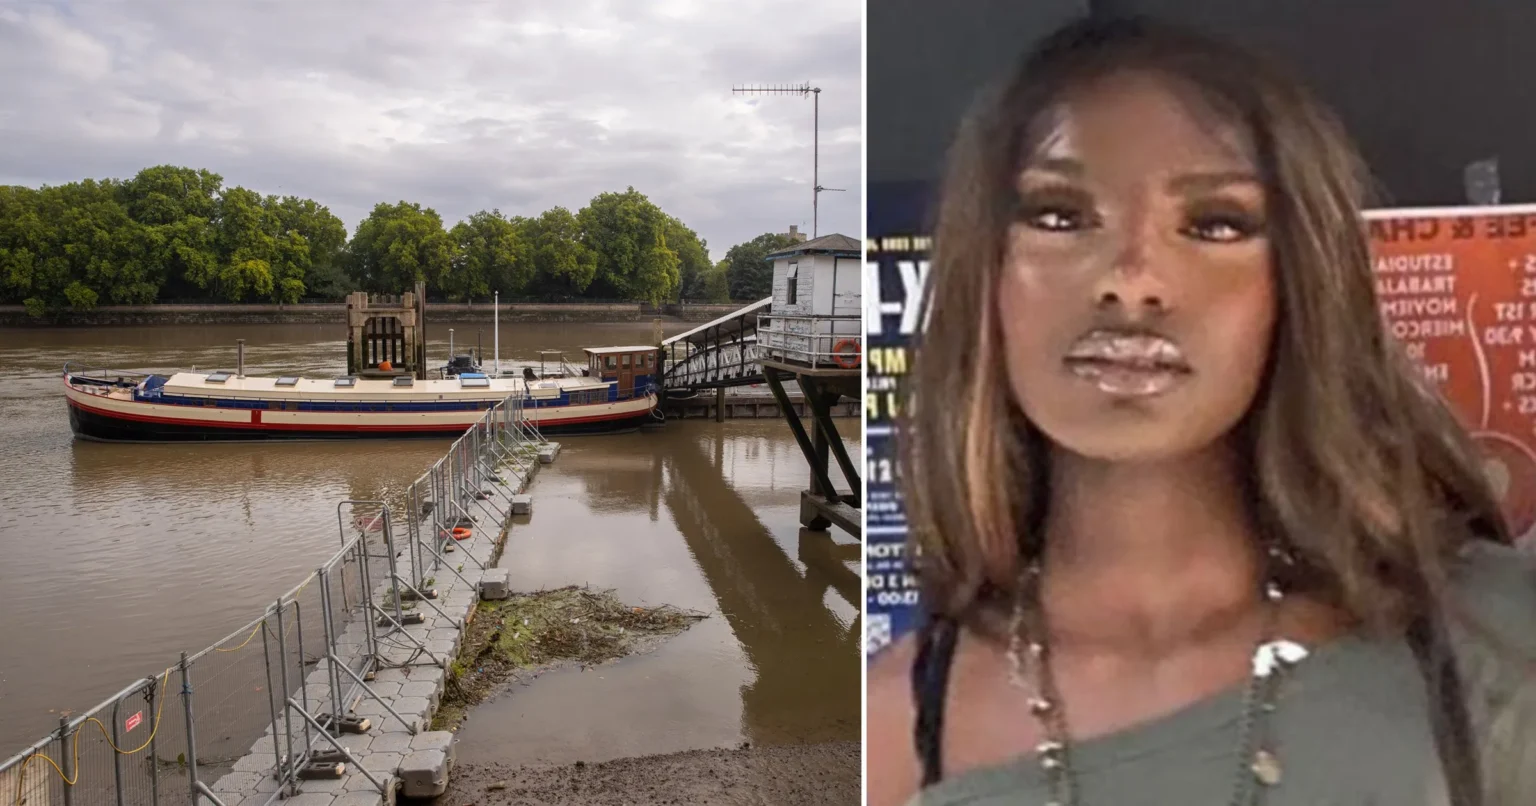 Body of student, 19, pulled from river after she went missing three weeks ago